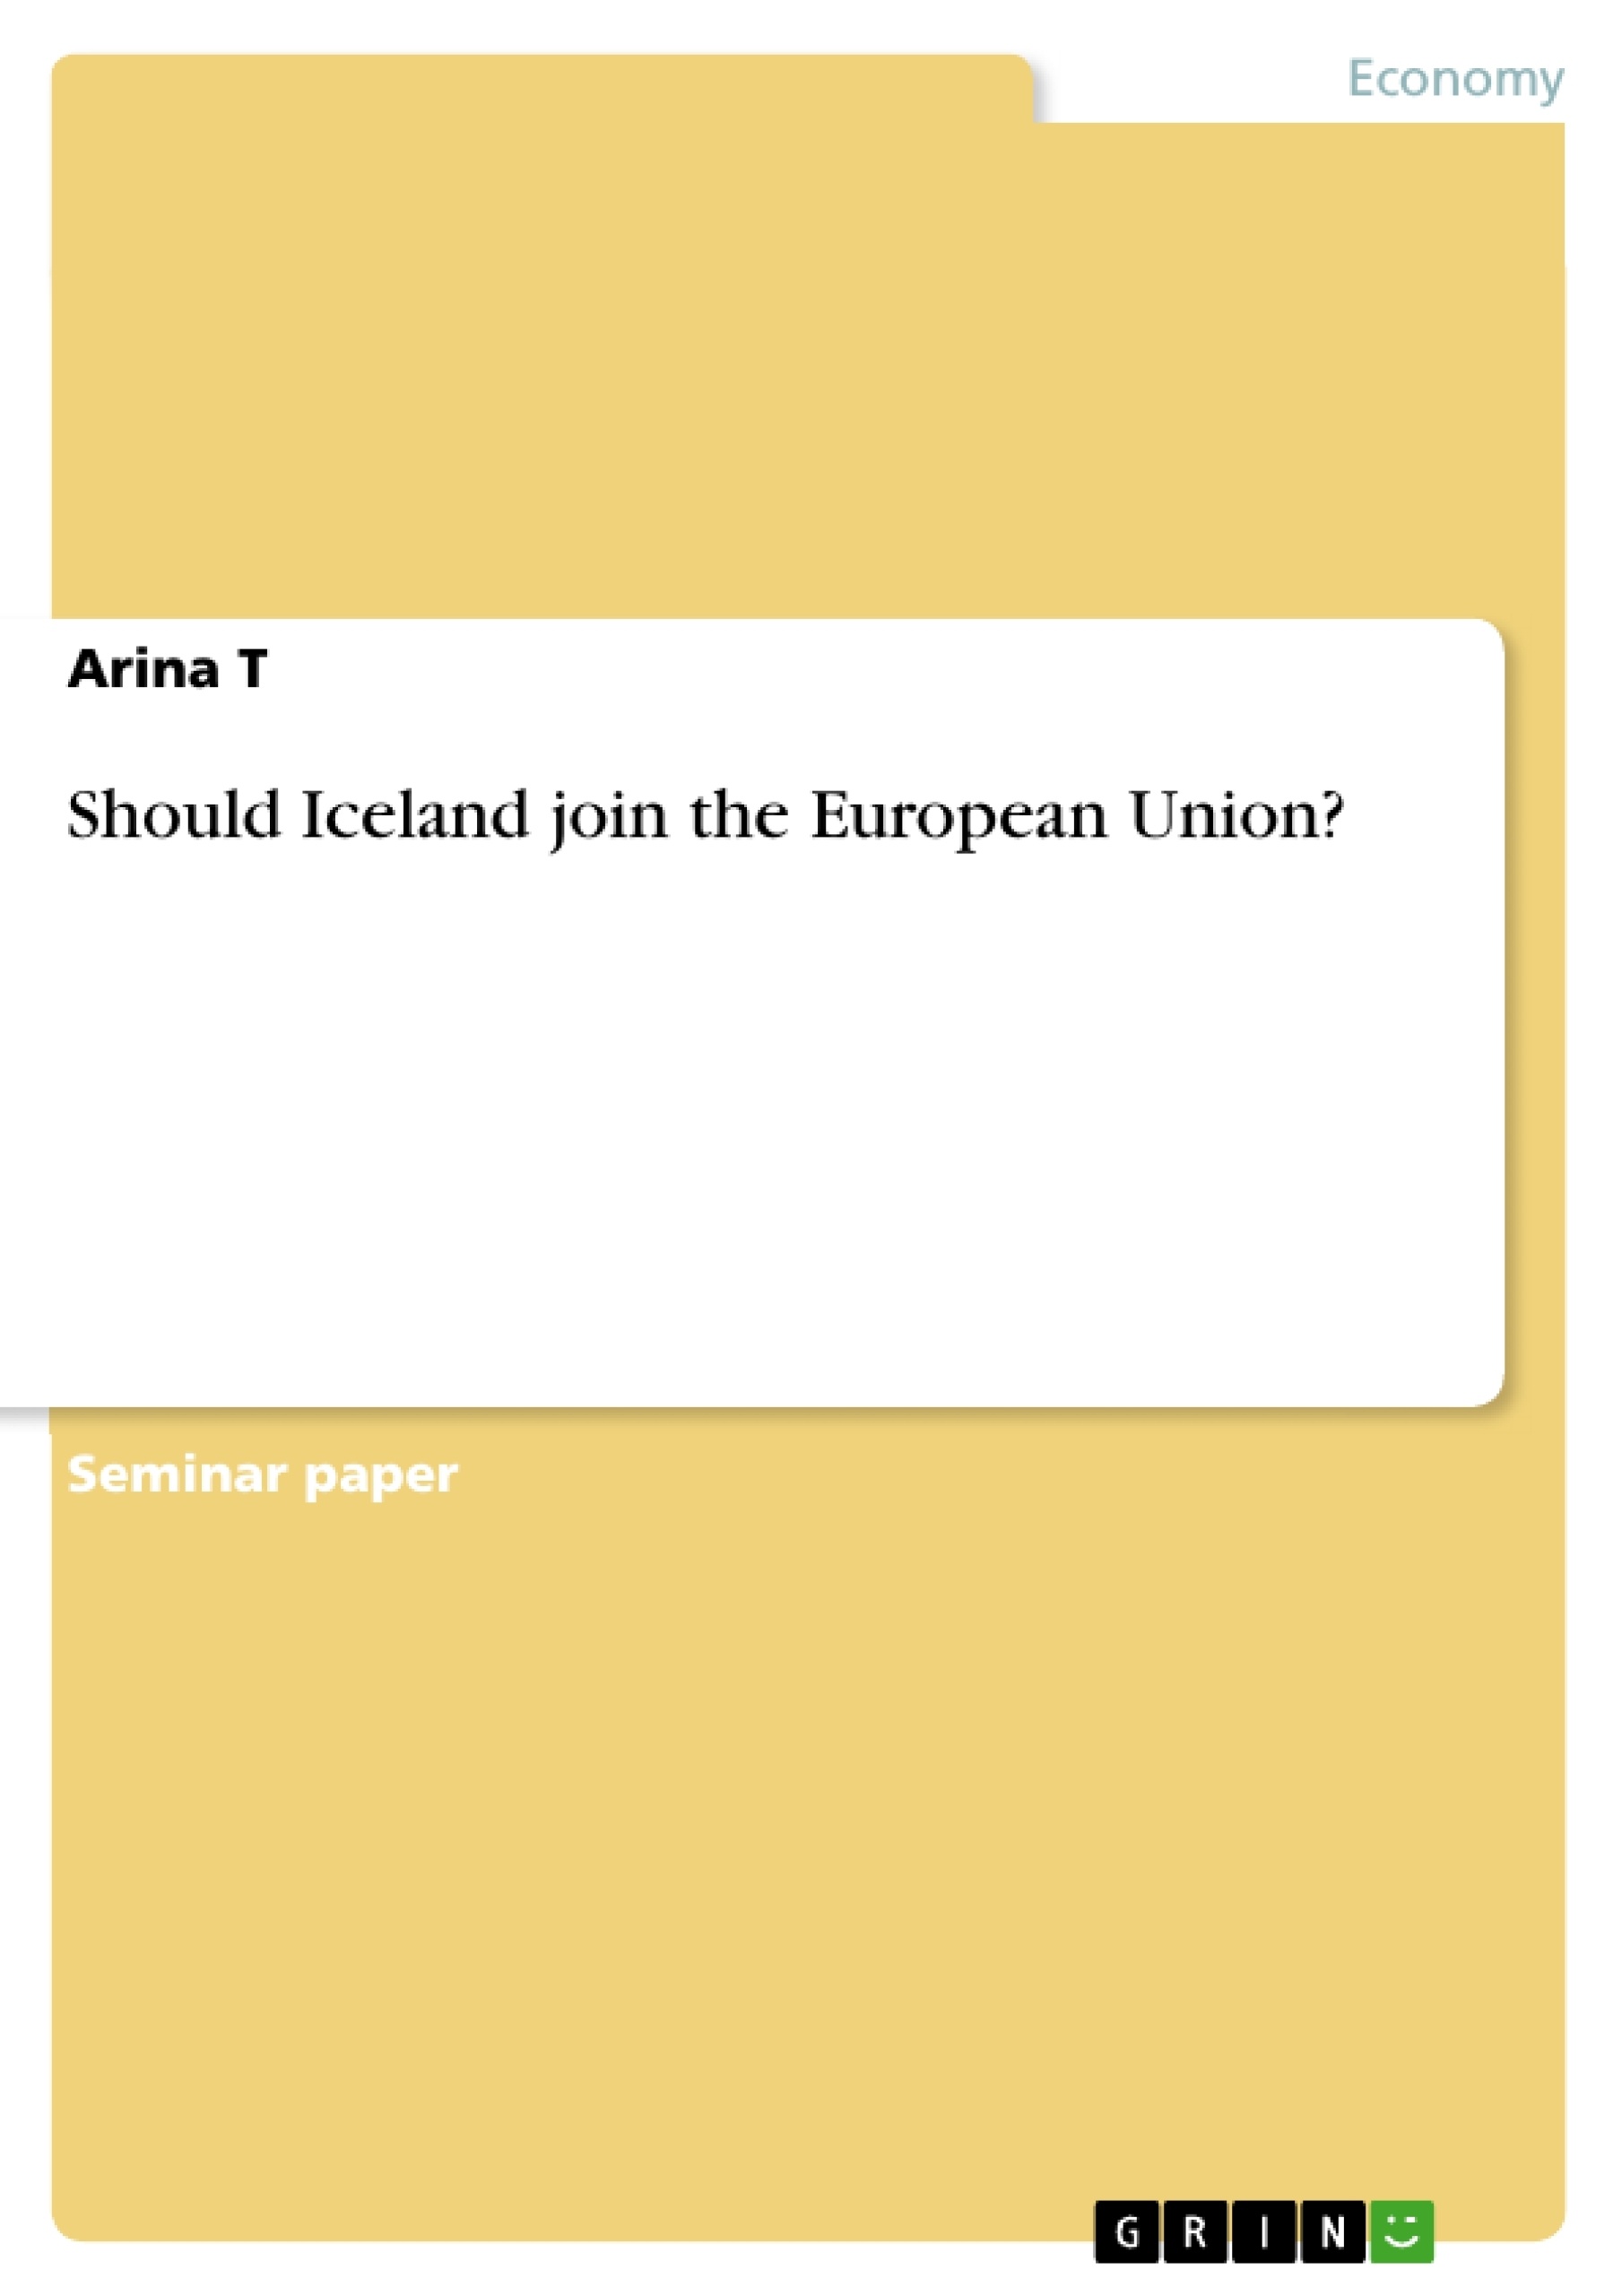 Titel: Should Iceland join the European Union?